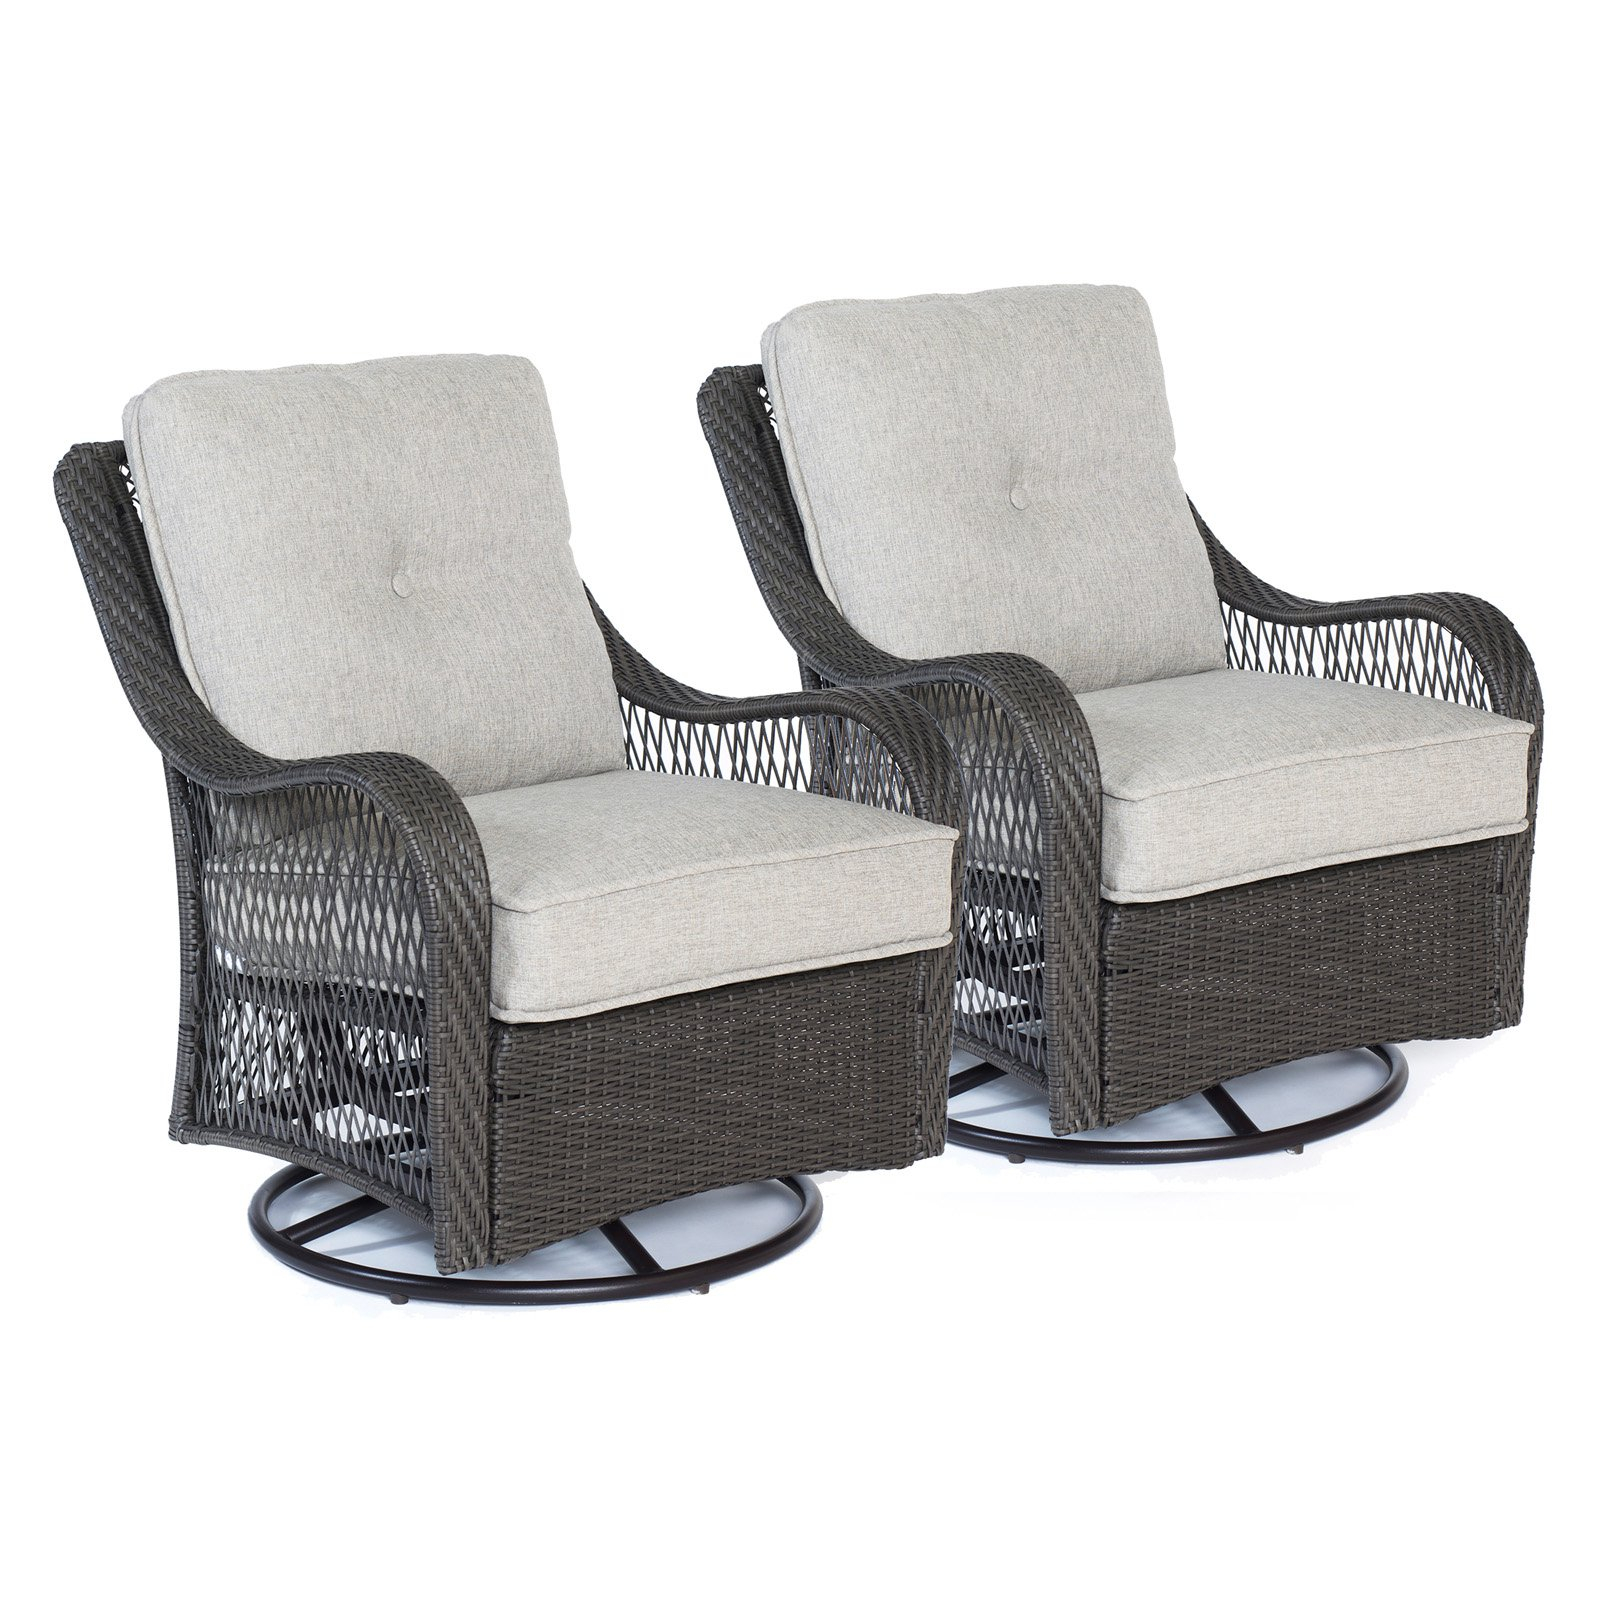 Outdoor Hanover Orleans Wicker Swivel Rocking Chair Set Of throughout dimensions 1600 X 1600